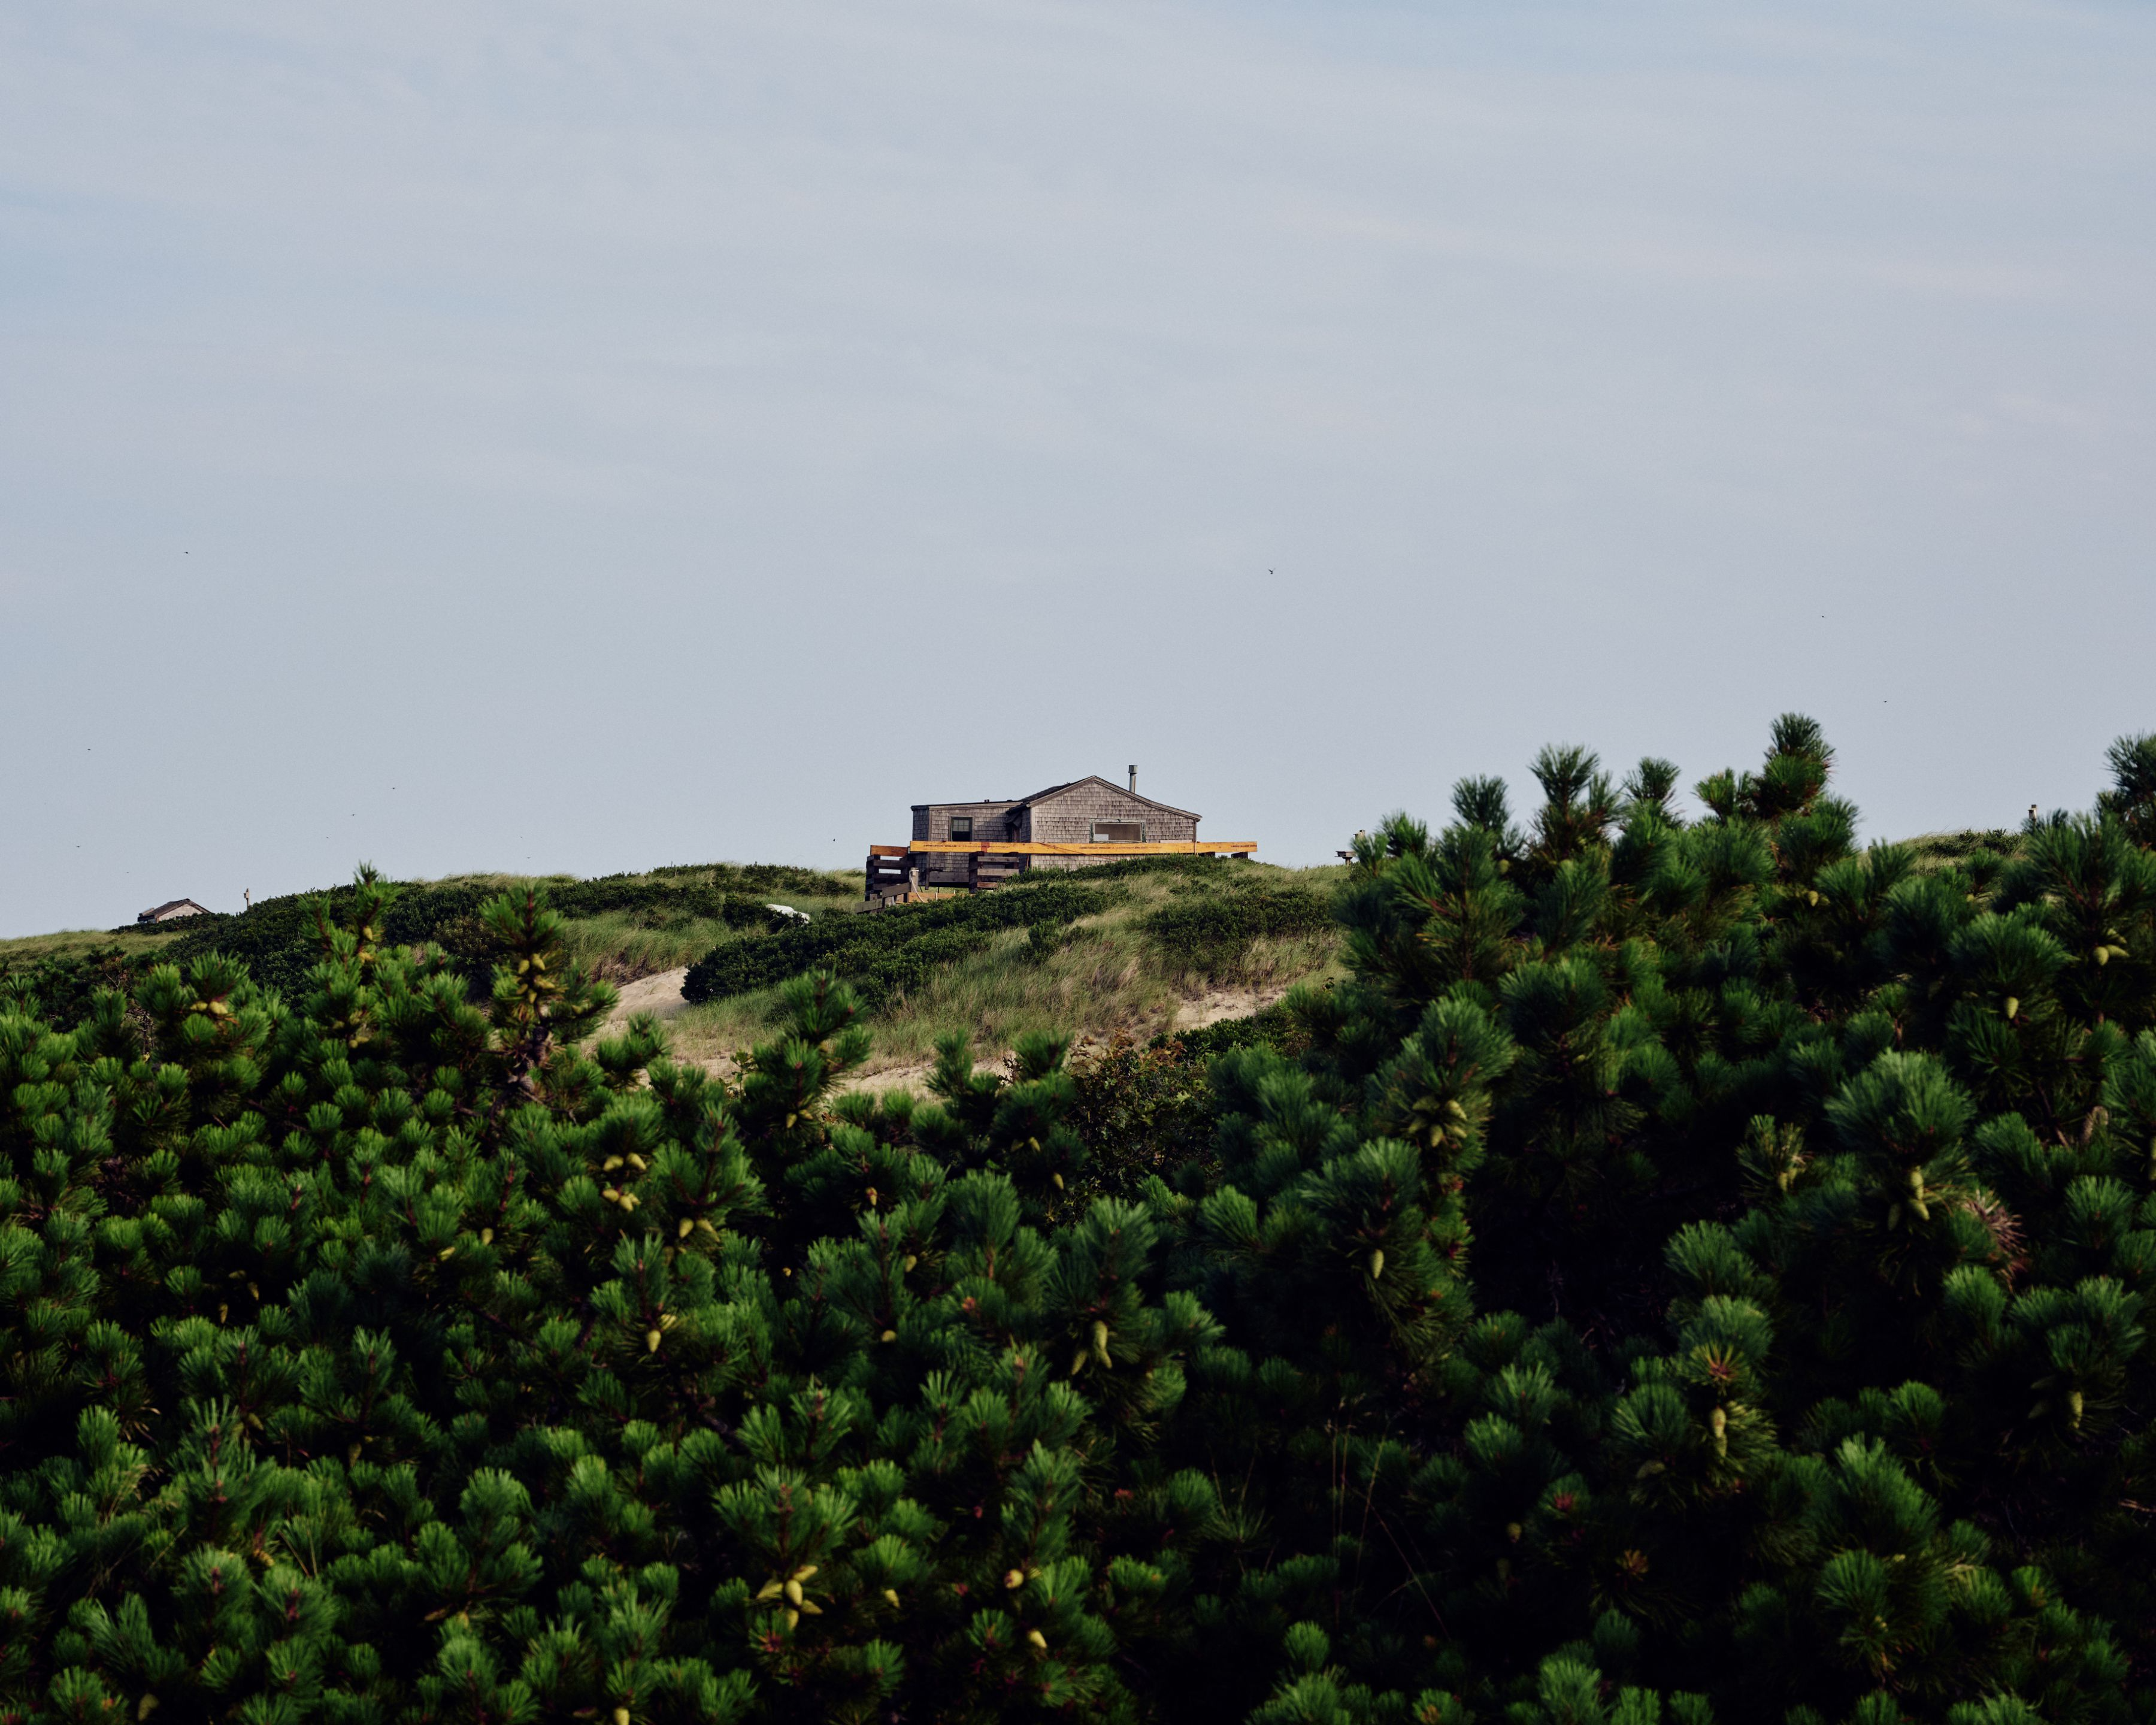 A dune shack along the Cape Cod National Seashore near Provincetown, Mass. Foliage in the foreground